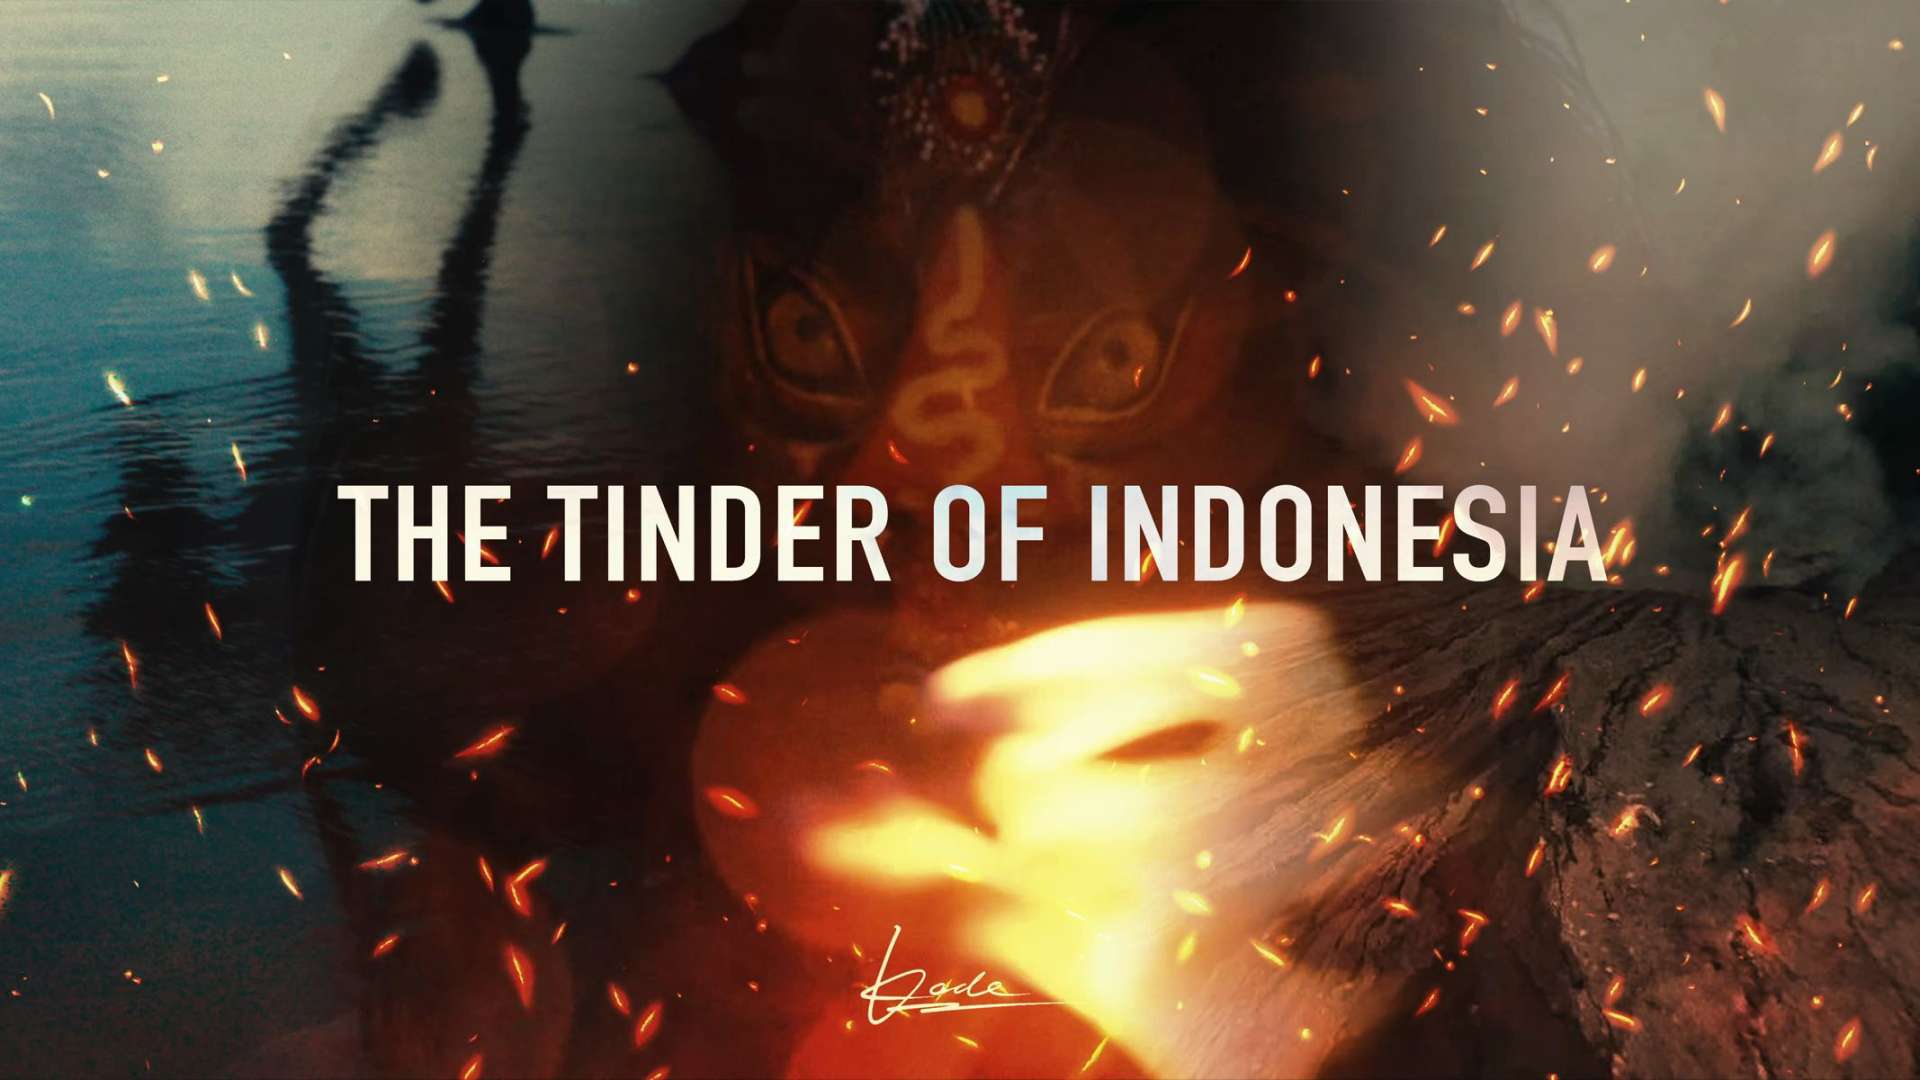 THE TINDER OF INDONESIA ｜ 在万岛之国的旅行